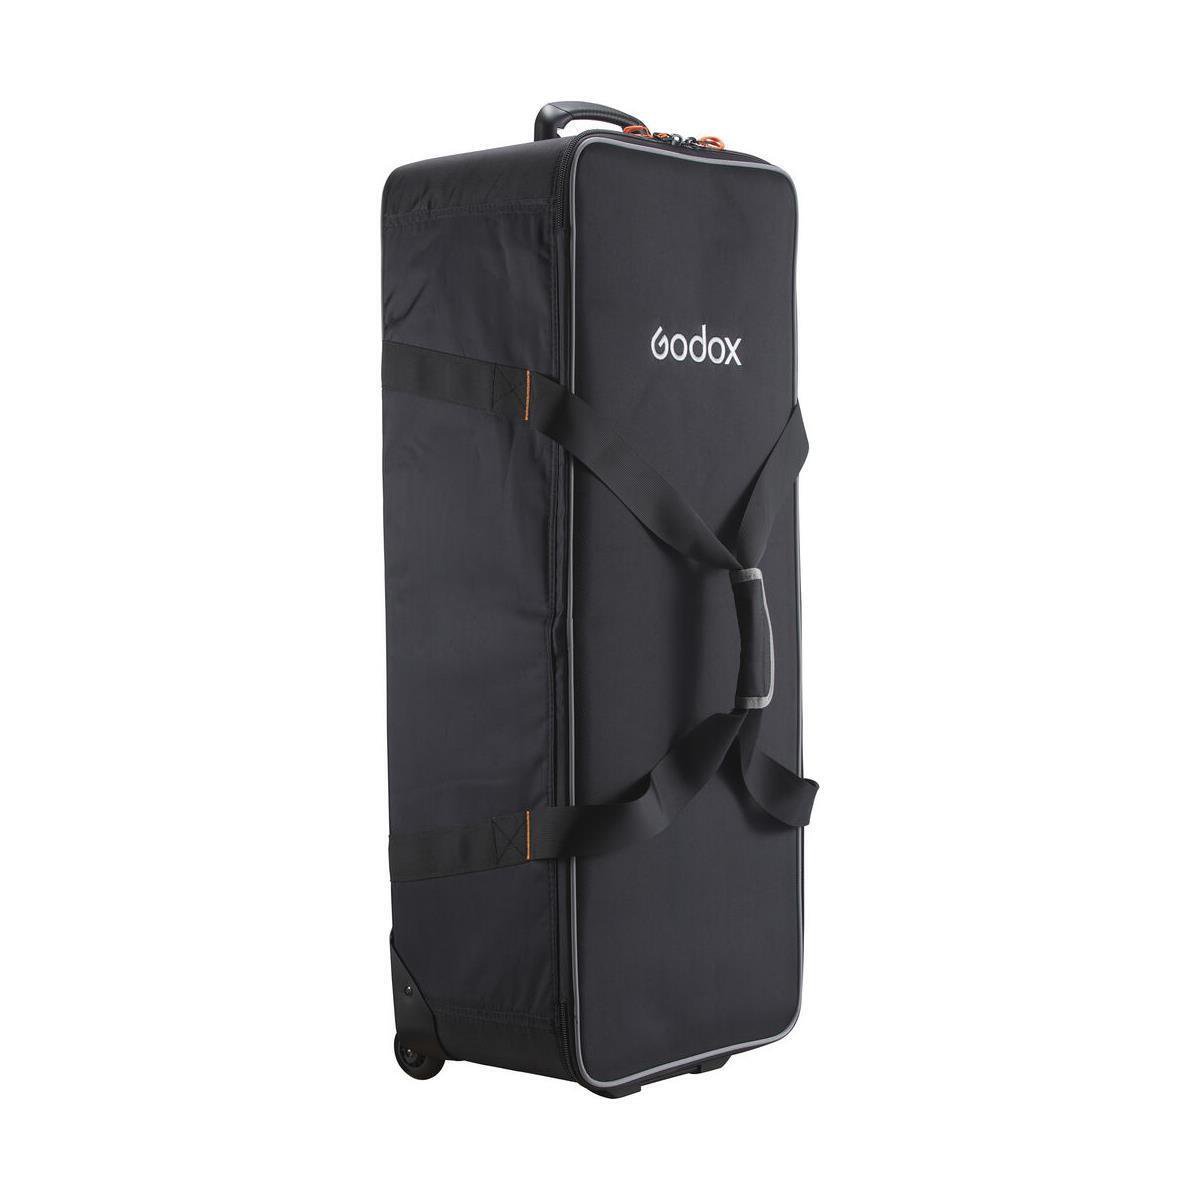 Cb-06 Hard Carrying Case With Wheels #Cb06